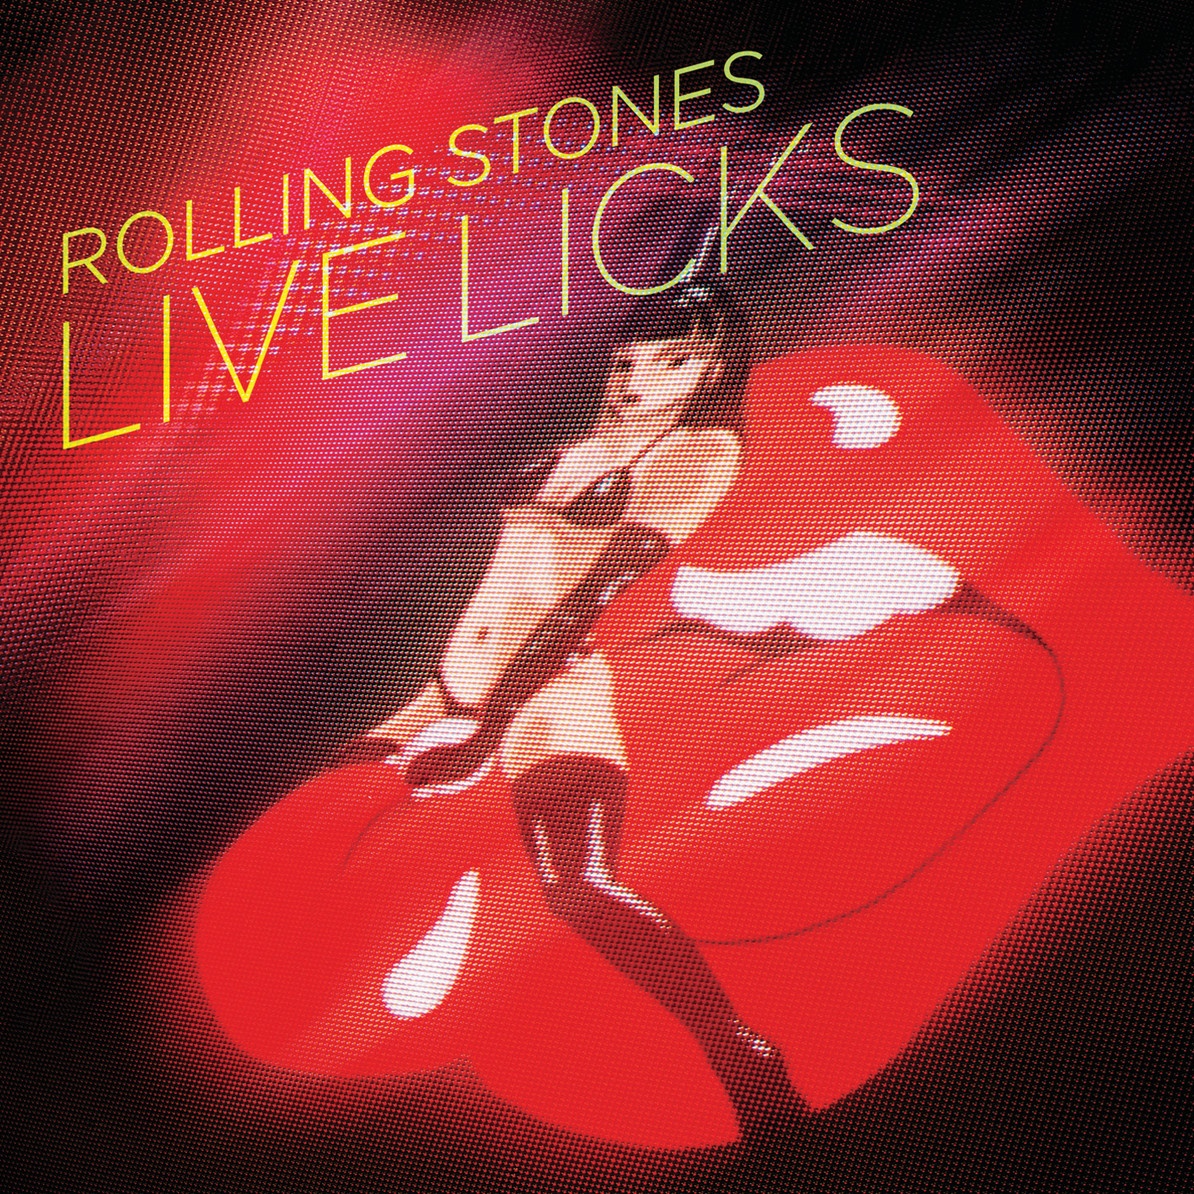 You Don't Have To Mean It - Live Licks Tour - 2009 Re-Mastered Digital Version